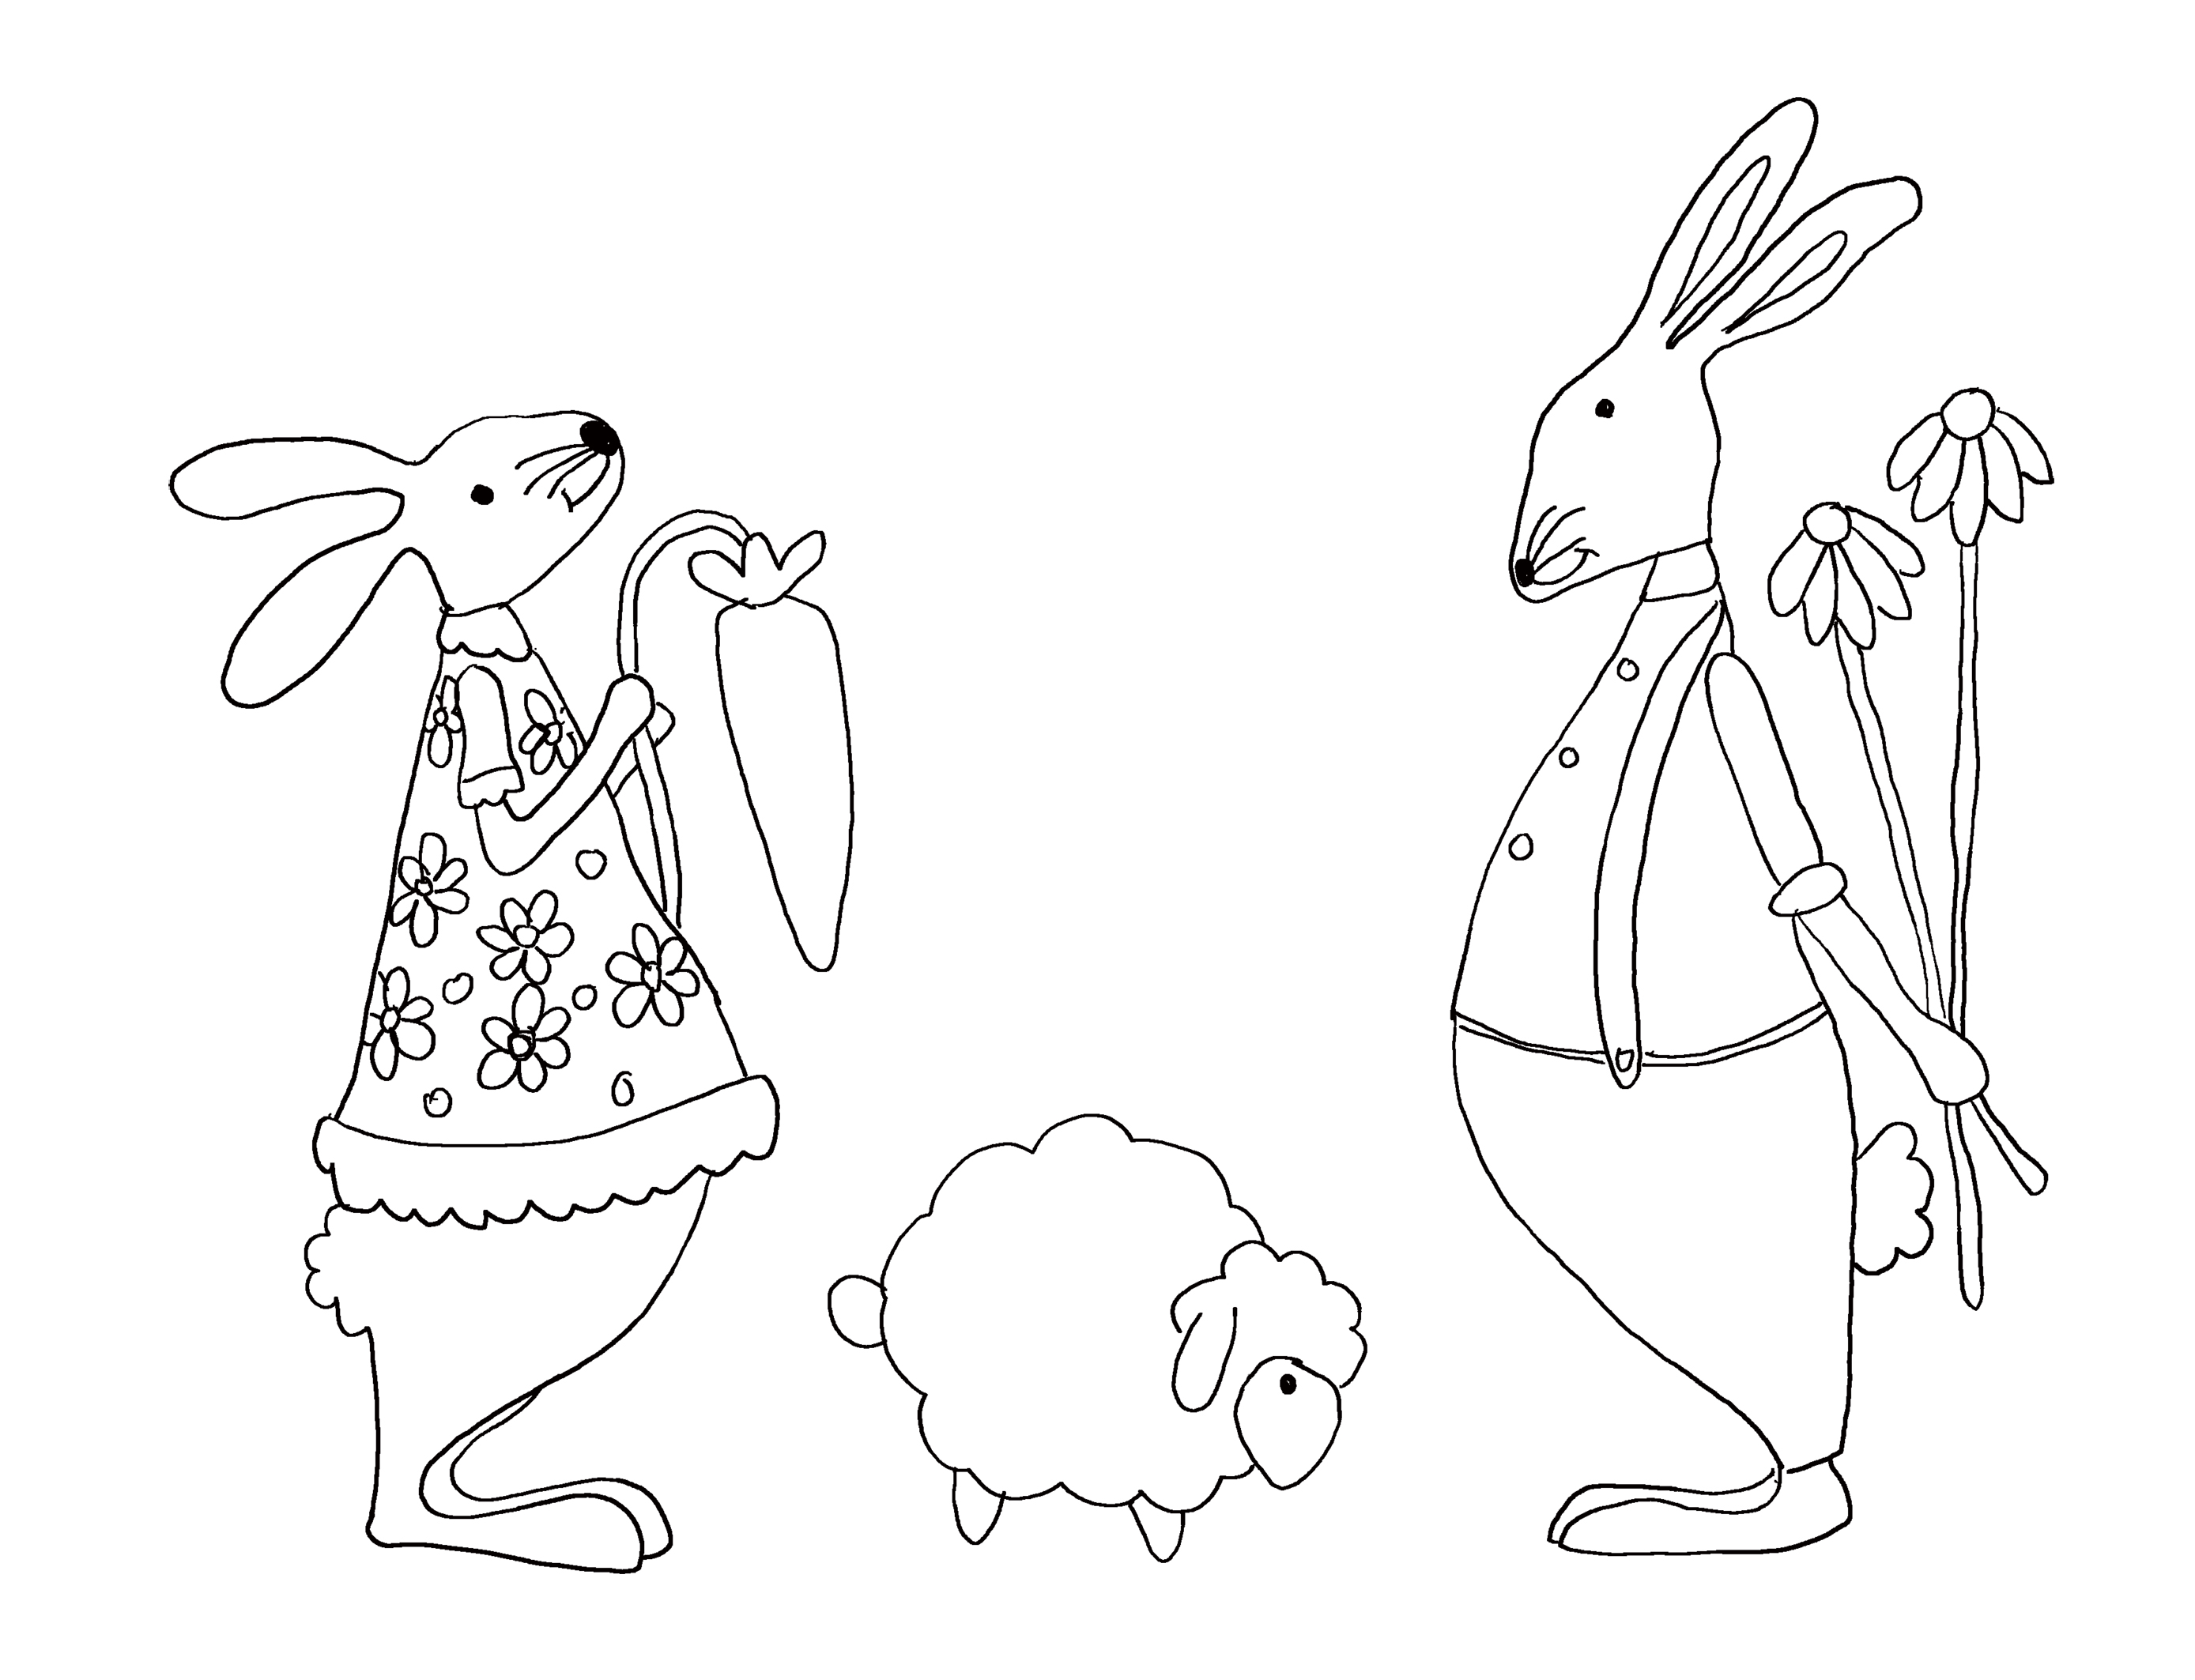 Cute coloring page for Easter with two bunnies and a lamb. 